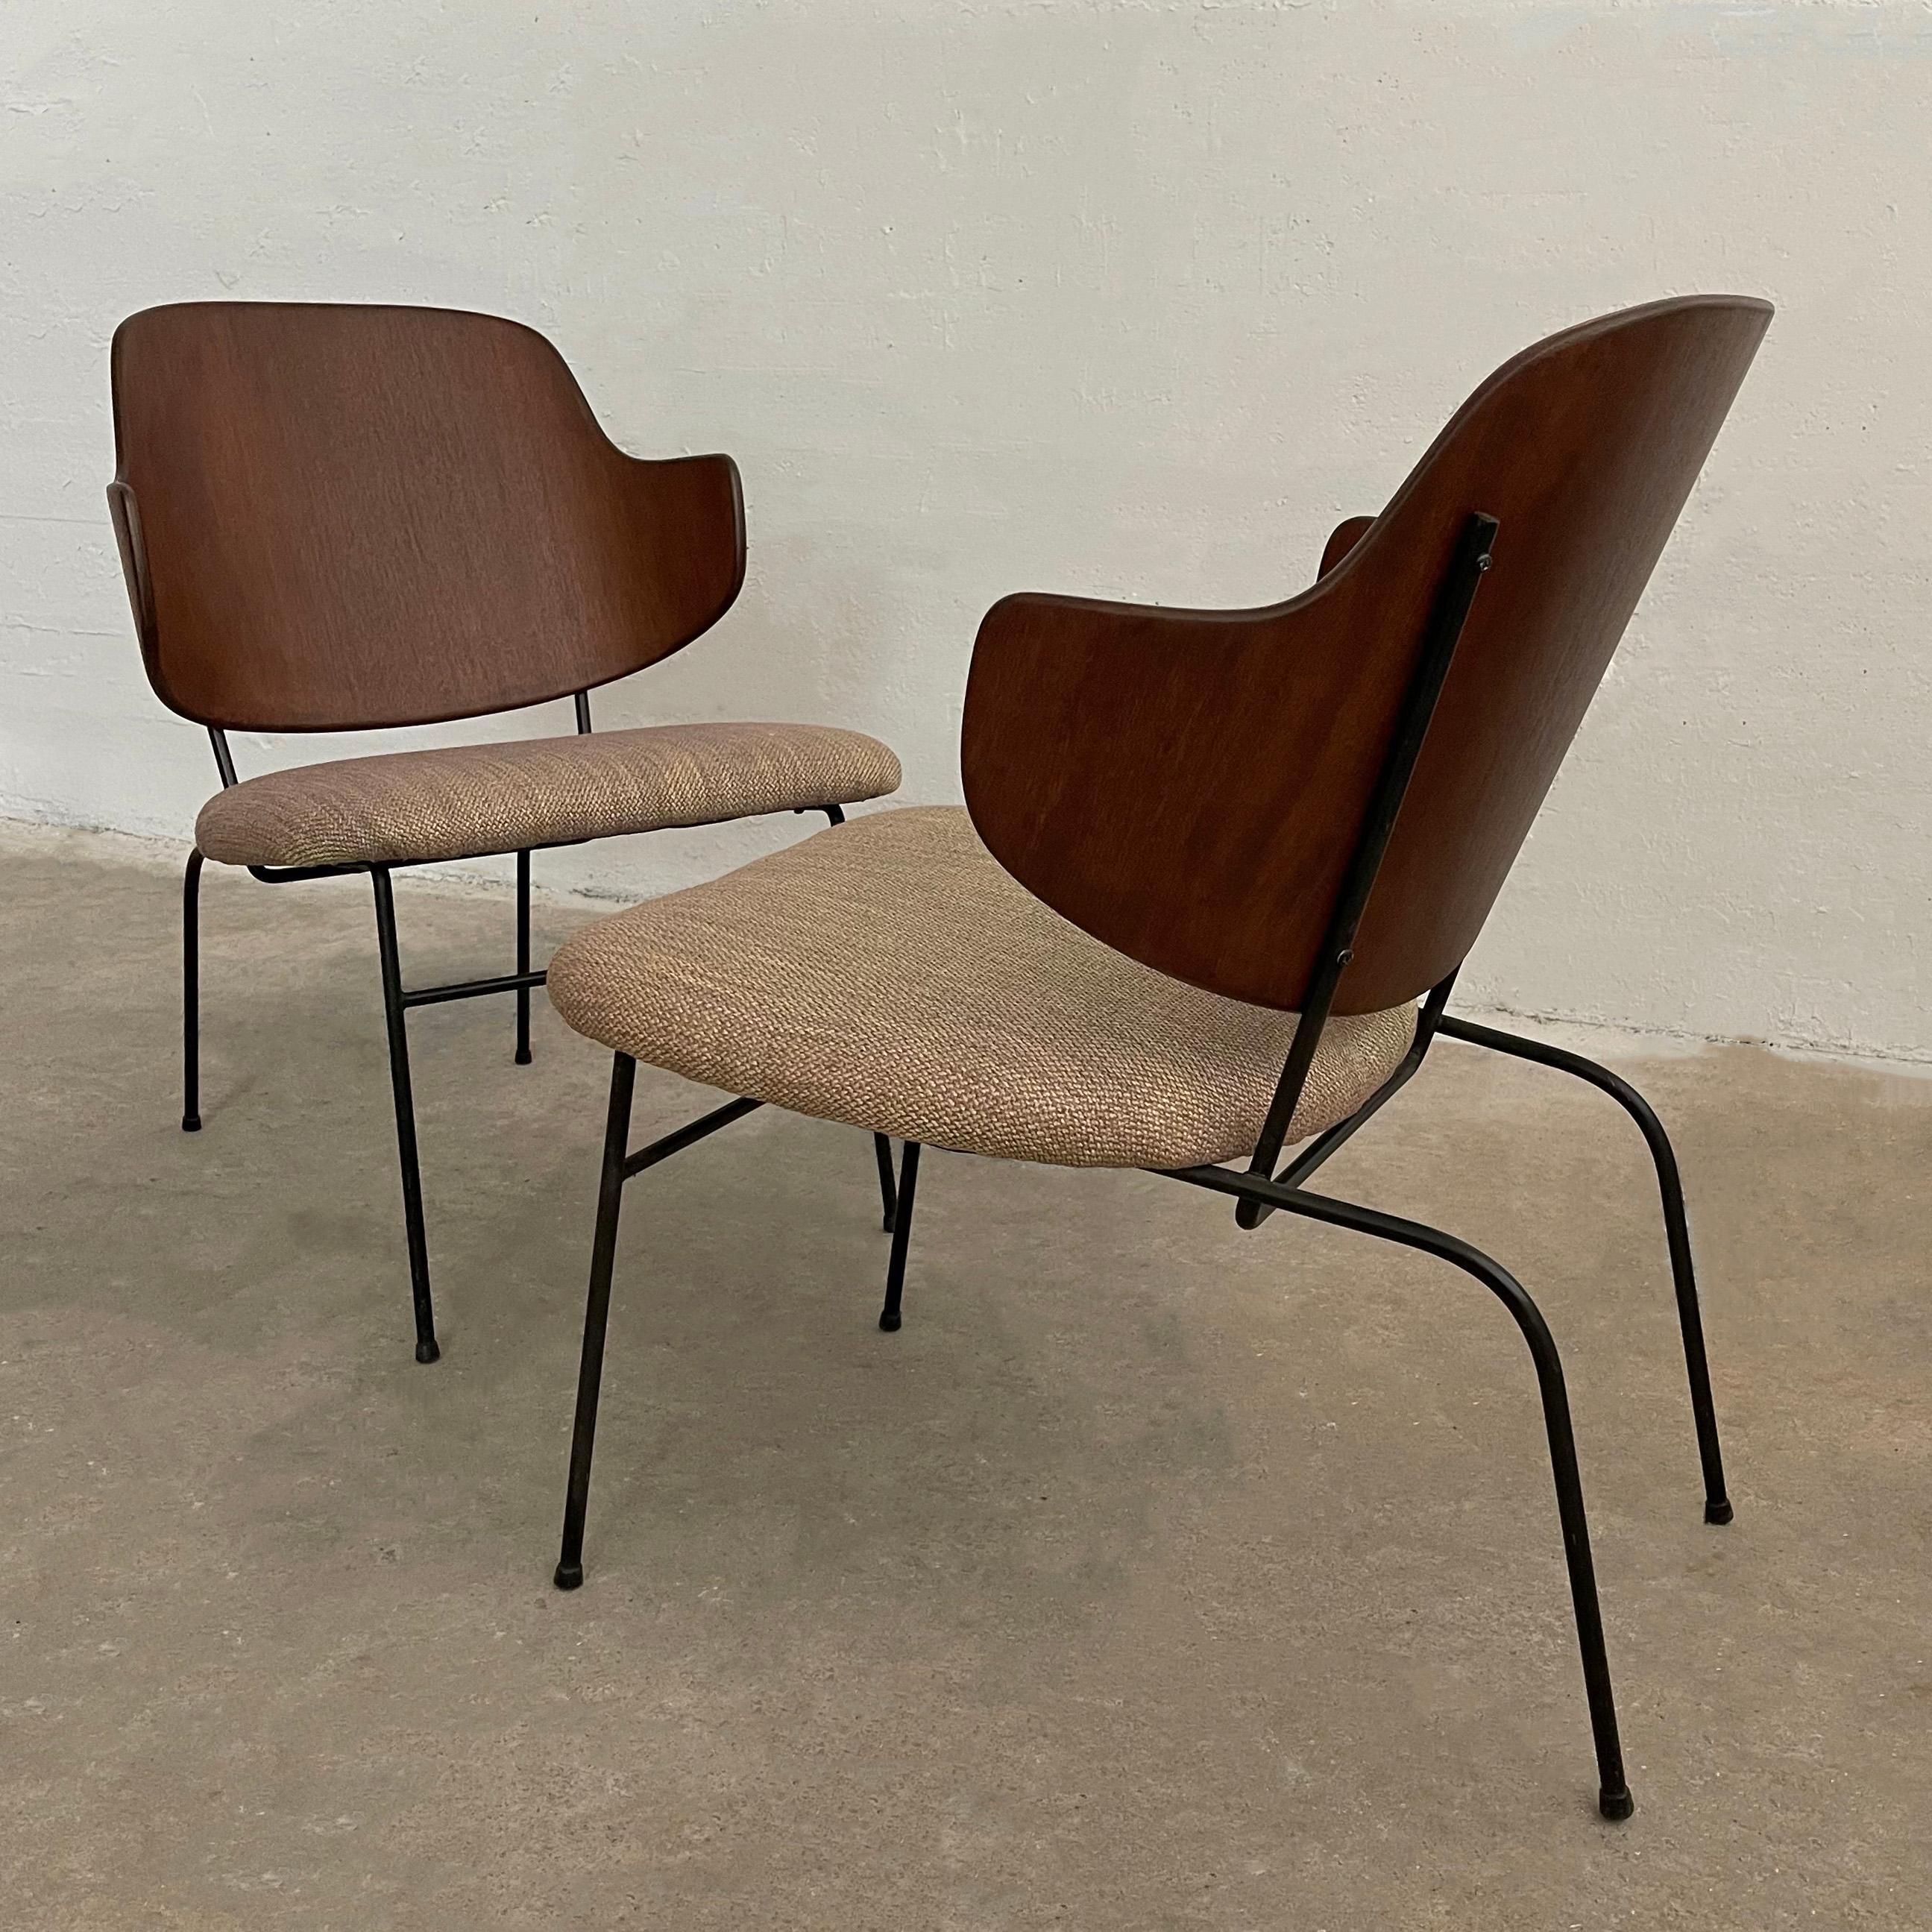 Pair Of Rare Model Penguin Chairs By Ib Kofod-Larsen For Selig For Sale 2